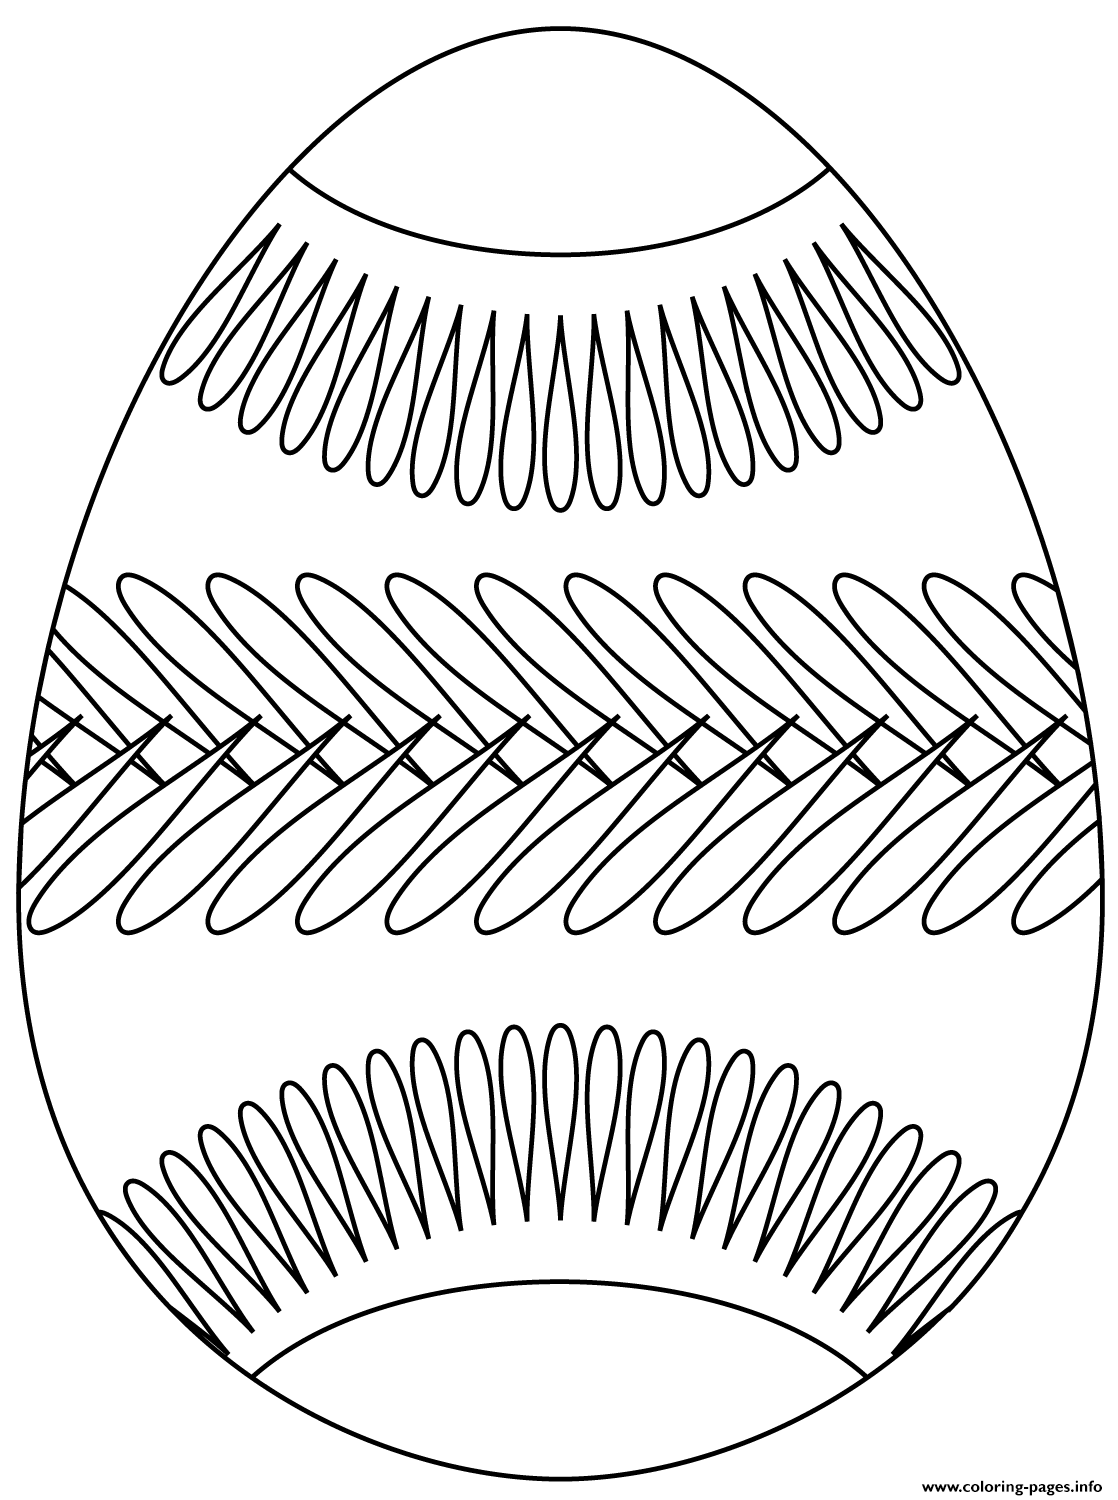 Easter Egg With Belt Pattern coloring